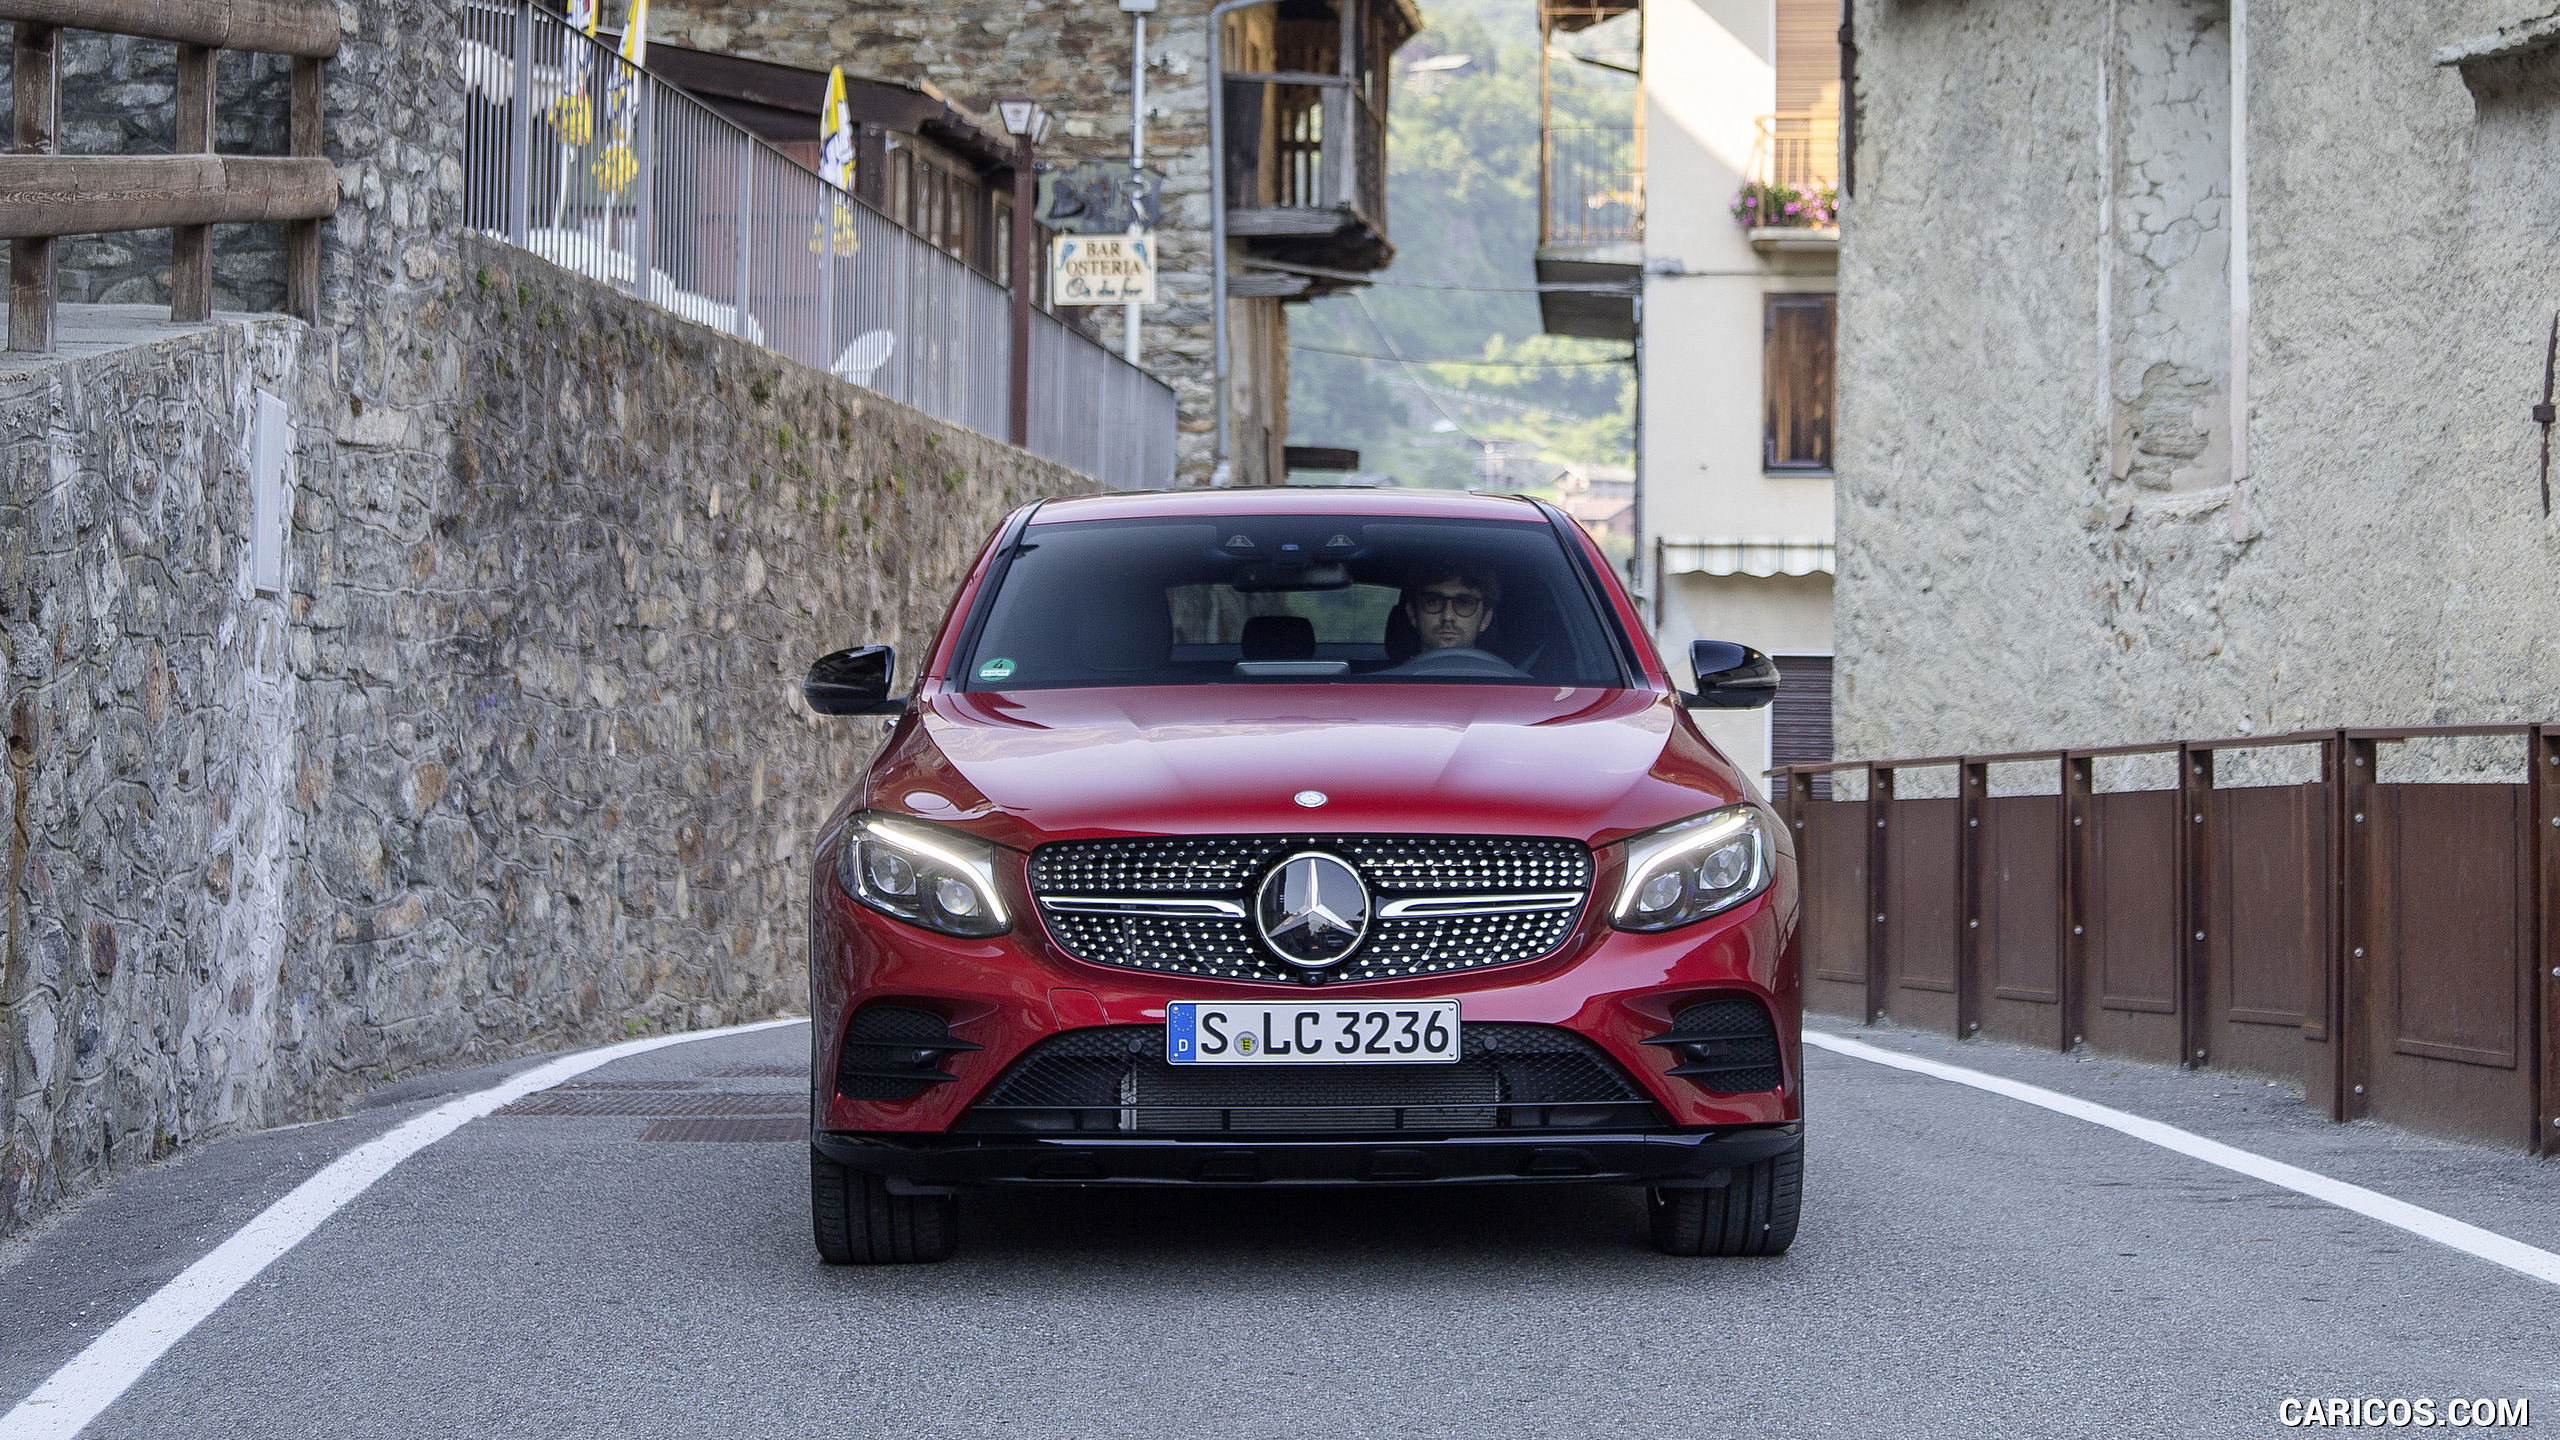 2017 Mercedes-Benz GLC 350 d Coupe (Diesel; Color: Hyacinth Red) - Front, #76 of 144